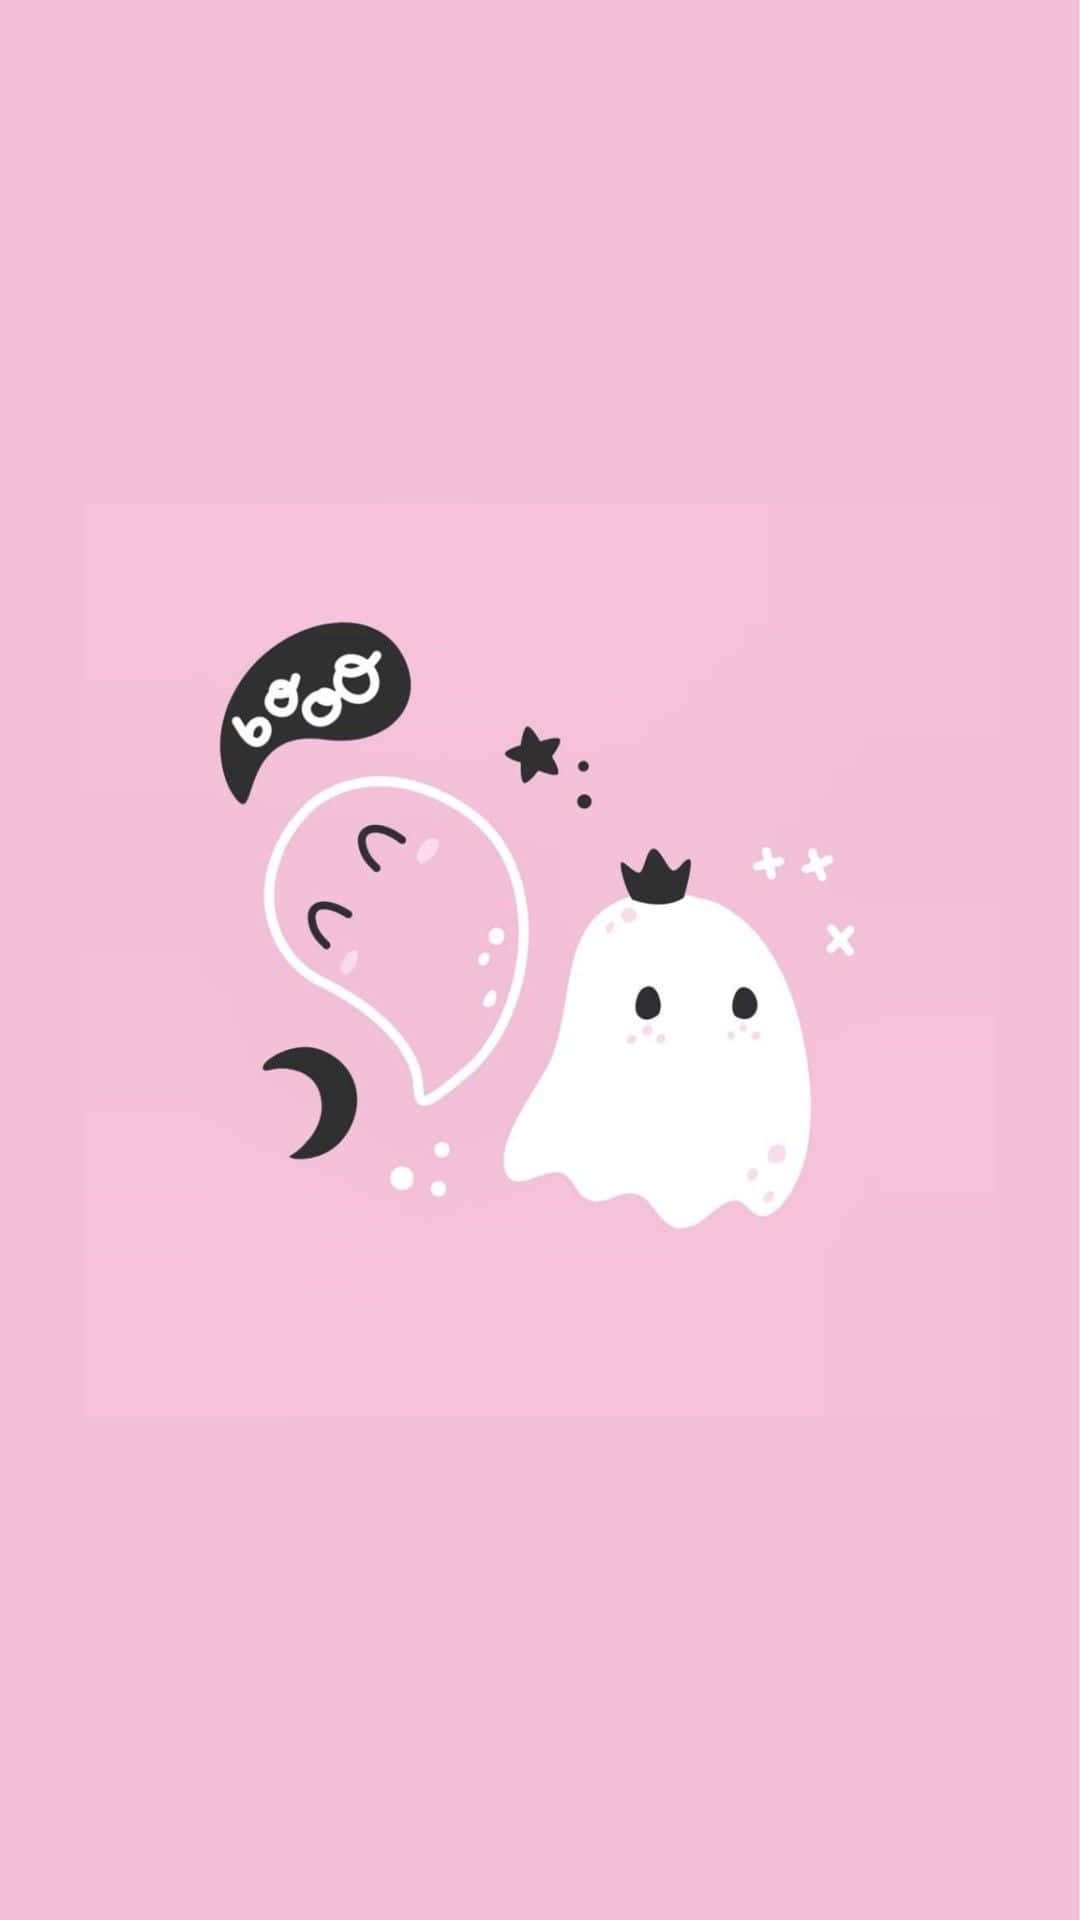 Cute Ghost And Speech Bubble Pink Background Wallpaper